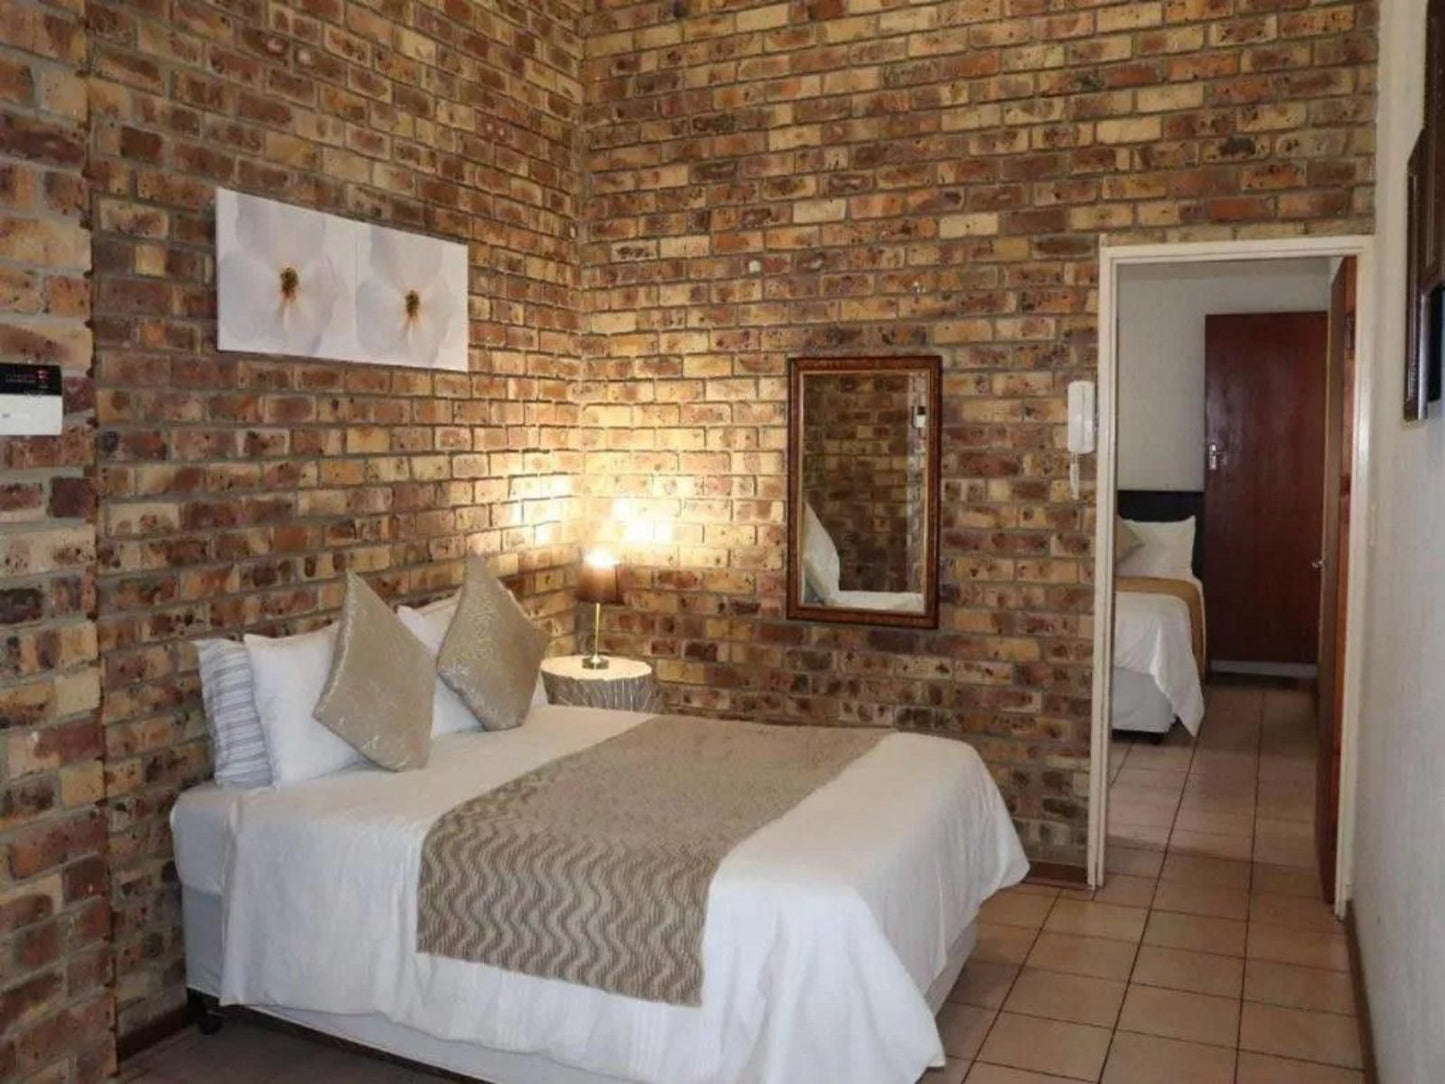 A Pousada Guesthouse Sonheuwel Nelspruit Mpumalanga South Africa Wall, Architecture, Bedroom, Brick Texture, Texture